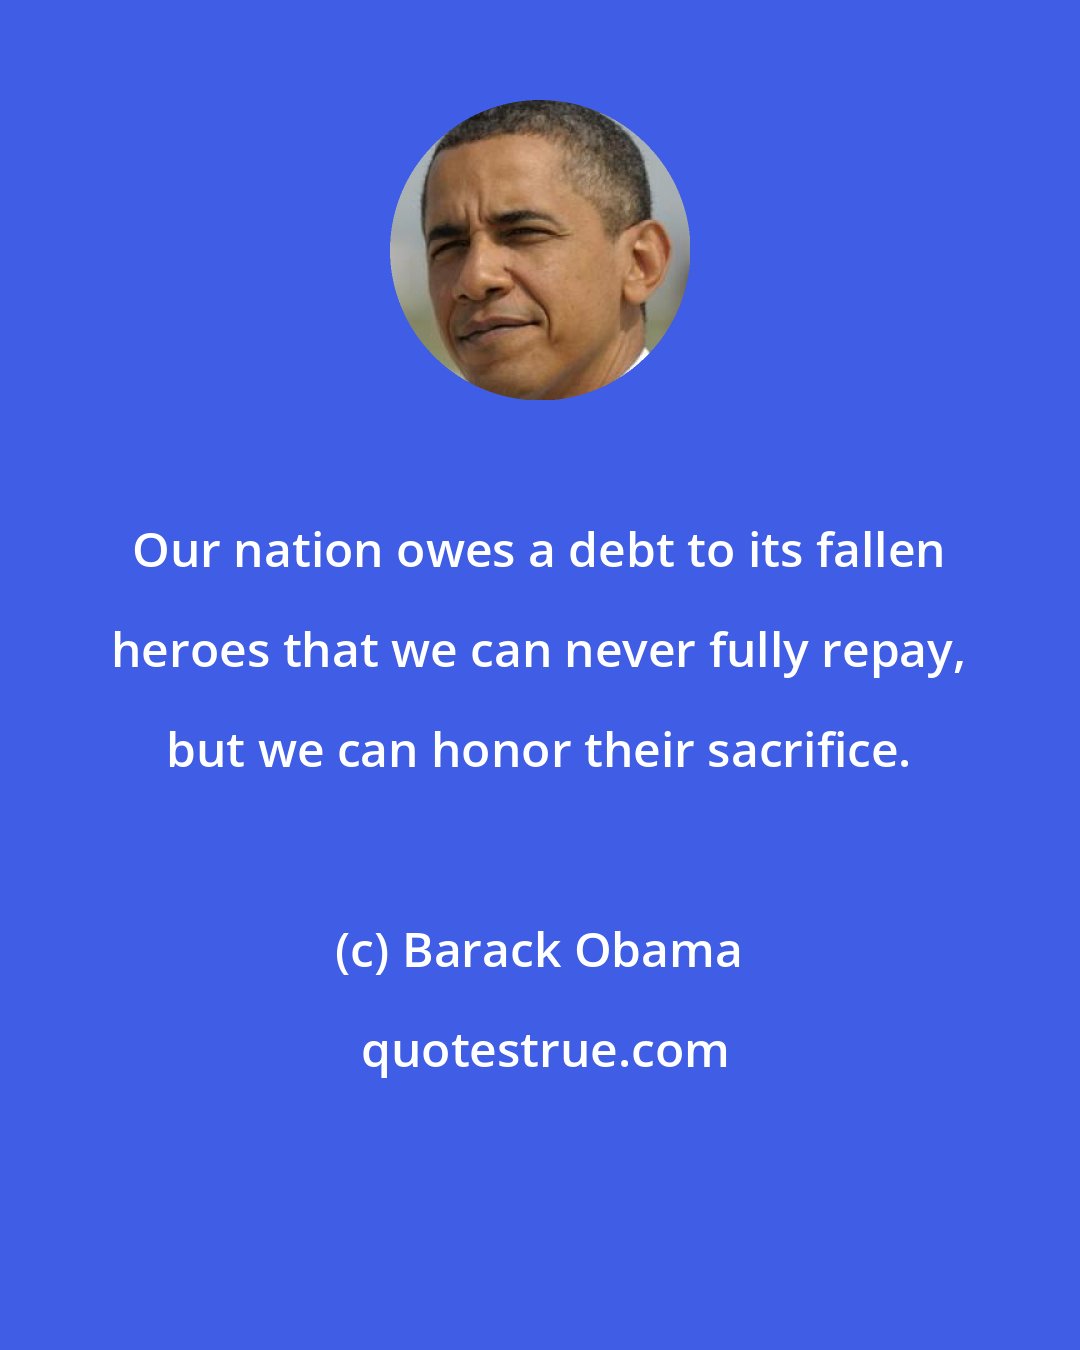 Barack Obama: Our nation owes a debt to its fallen heroes that we can never fully repay, but we can honor their sacrifice.